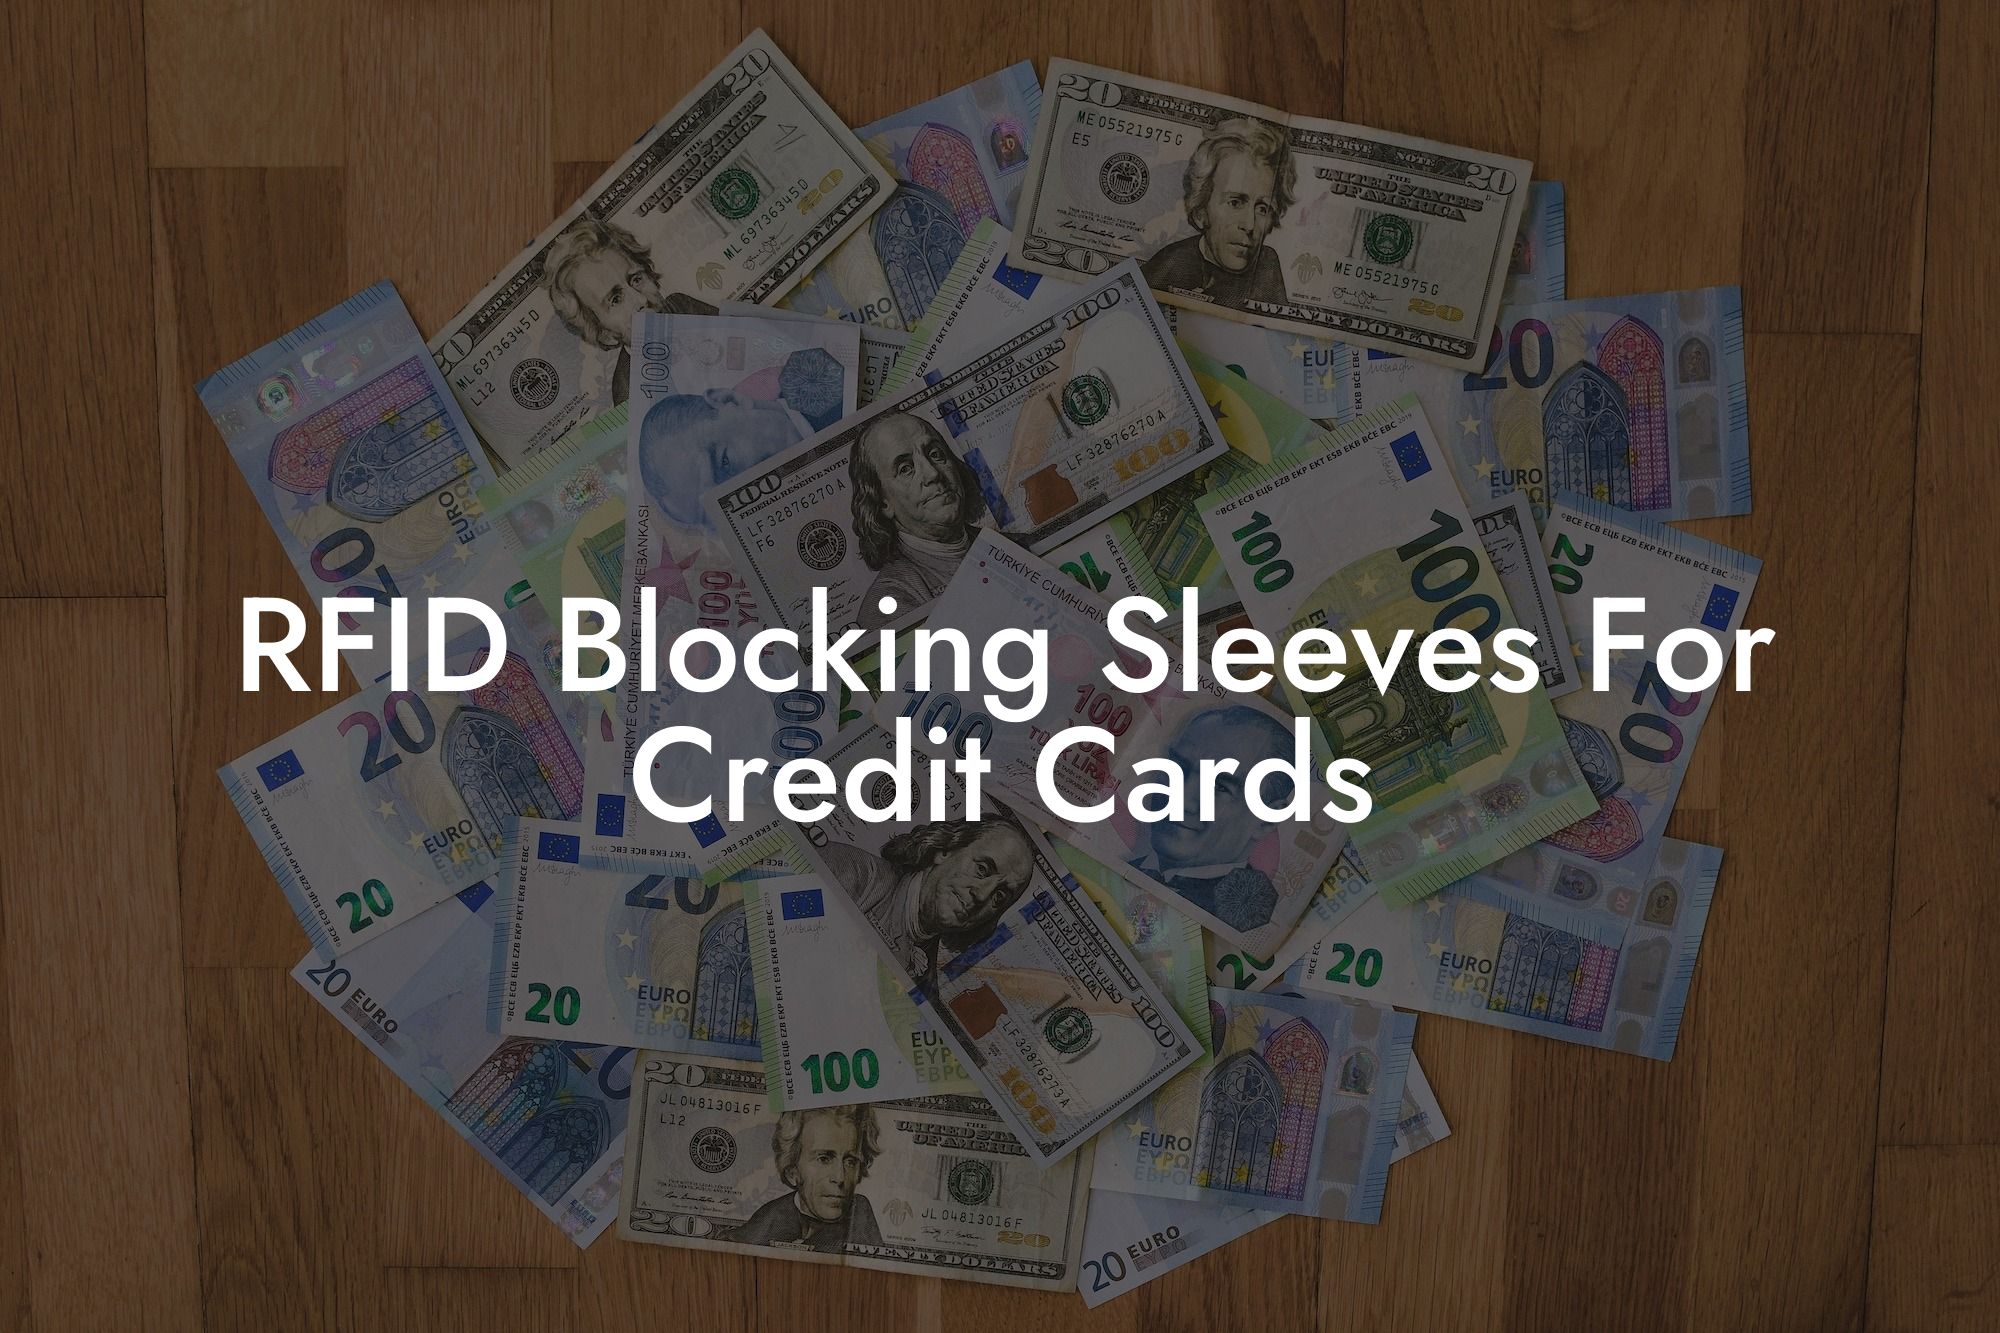 RFID Blocking Sleeves For Credit Cards